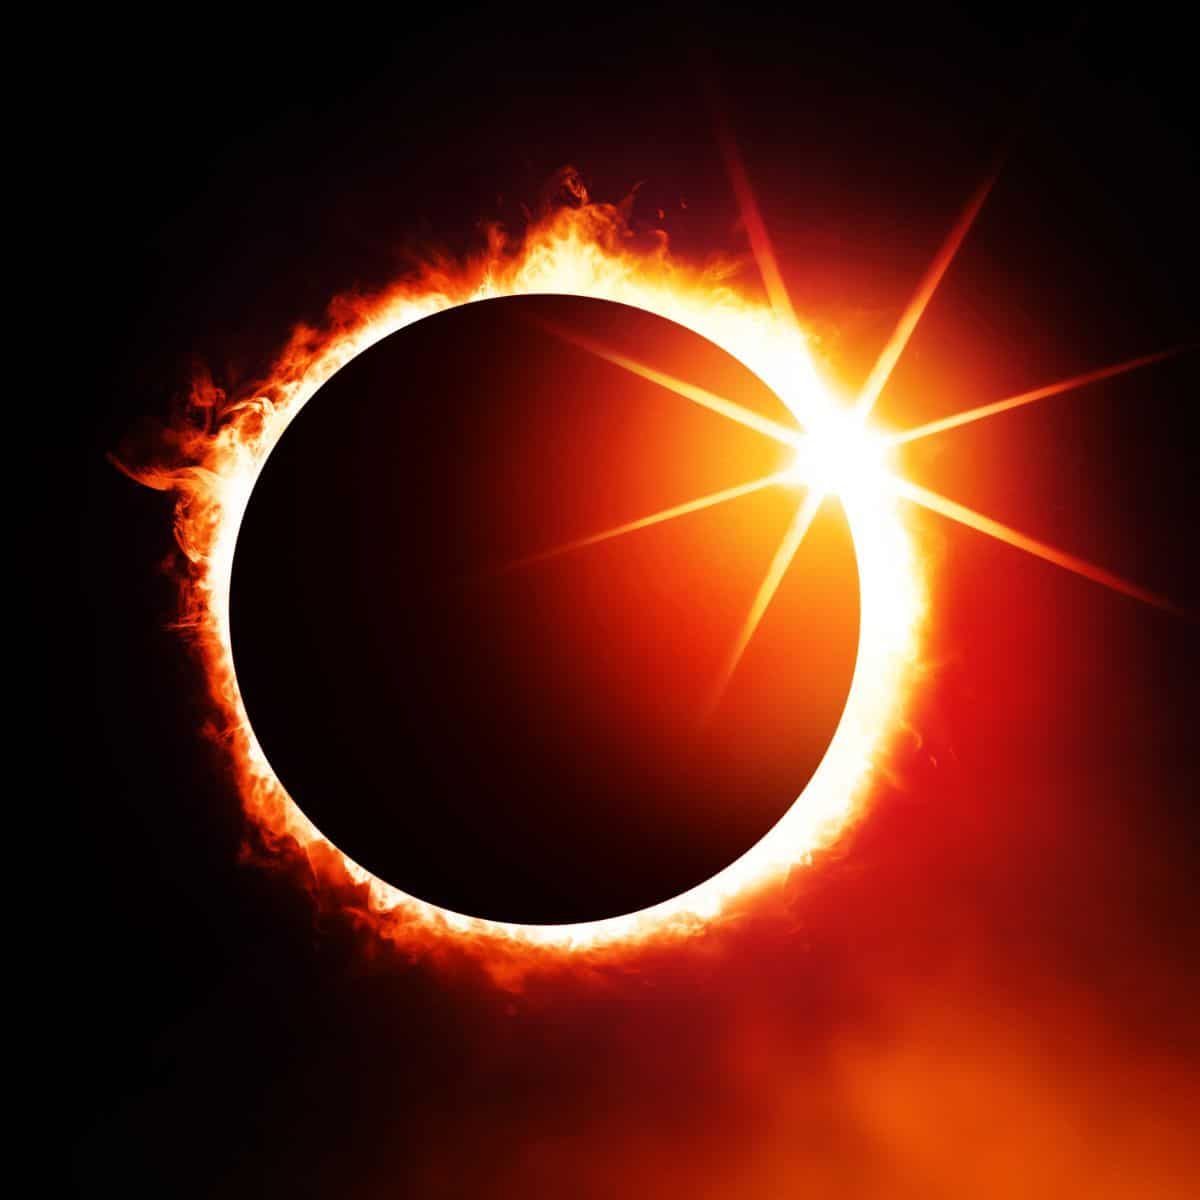 ring of fire solar eclipse spiritual meaning